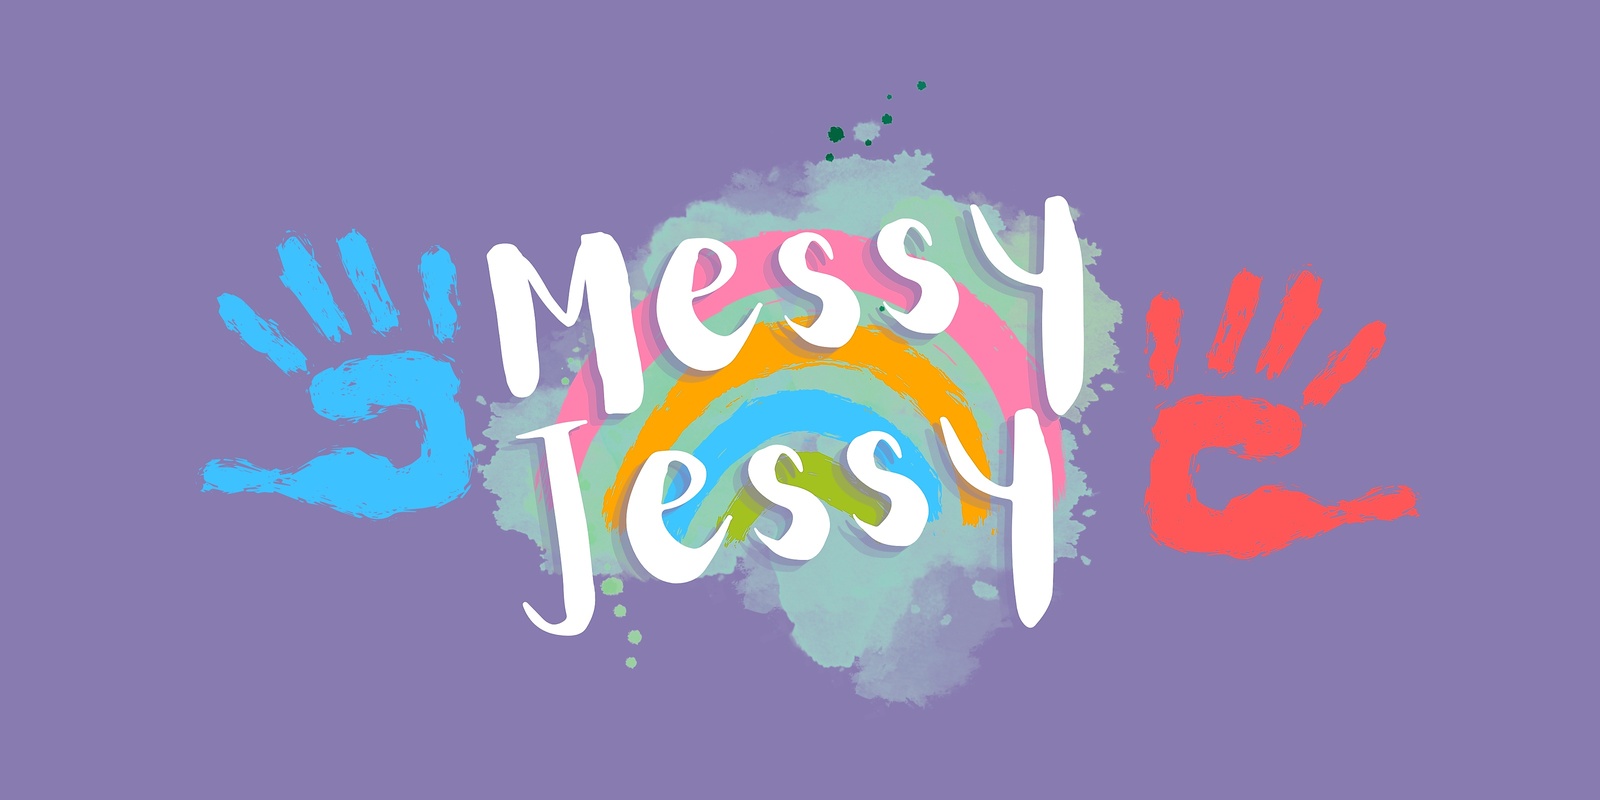 Banner image for Messy Jessy Sensory Wednesday 11AM